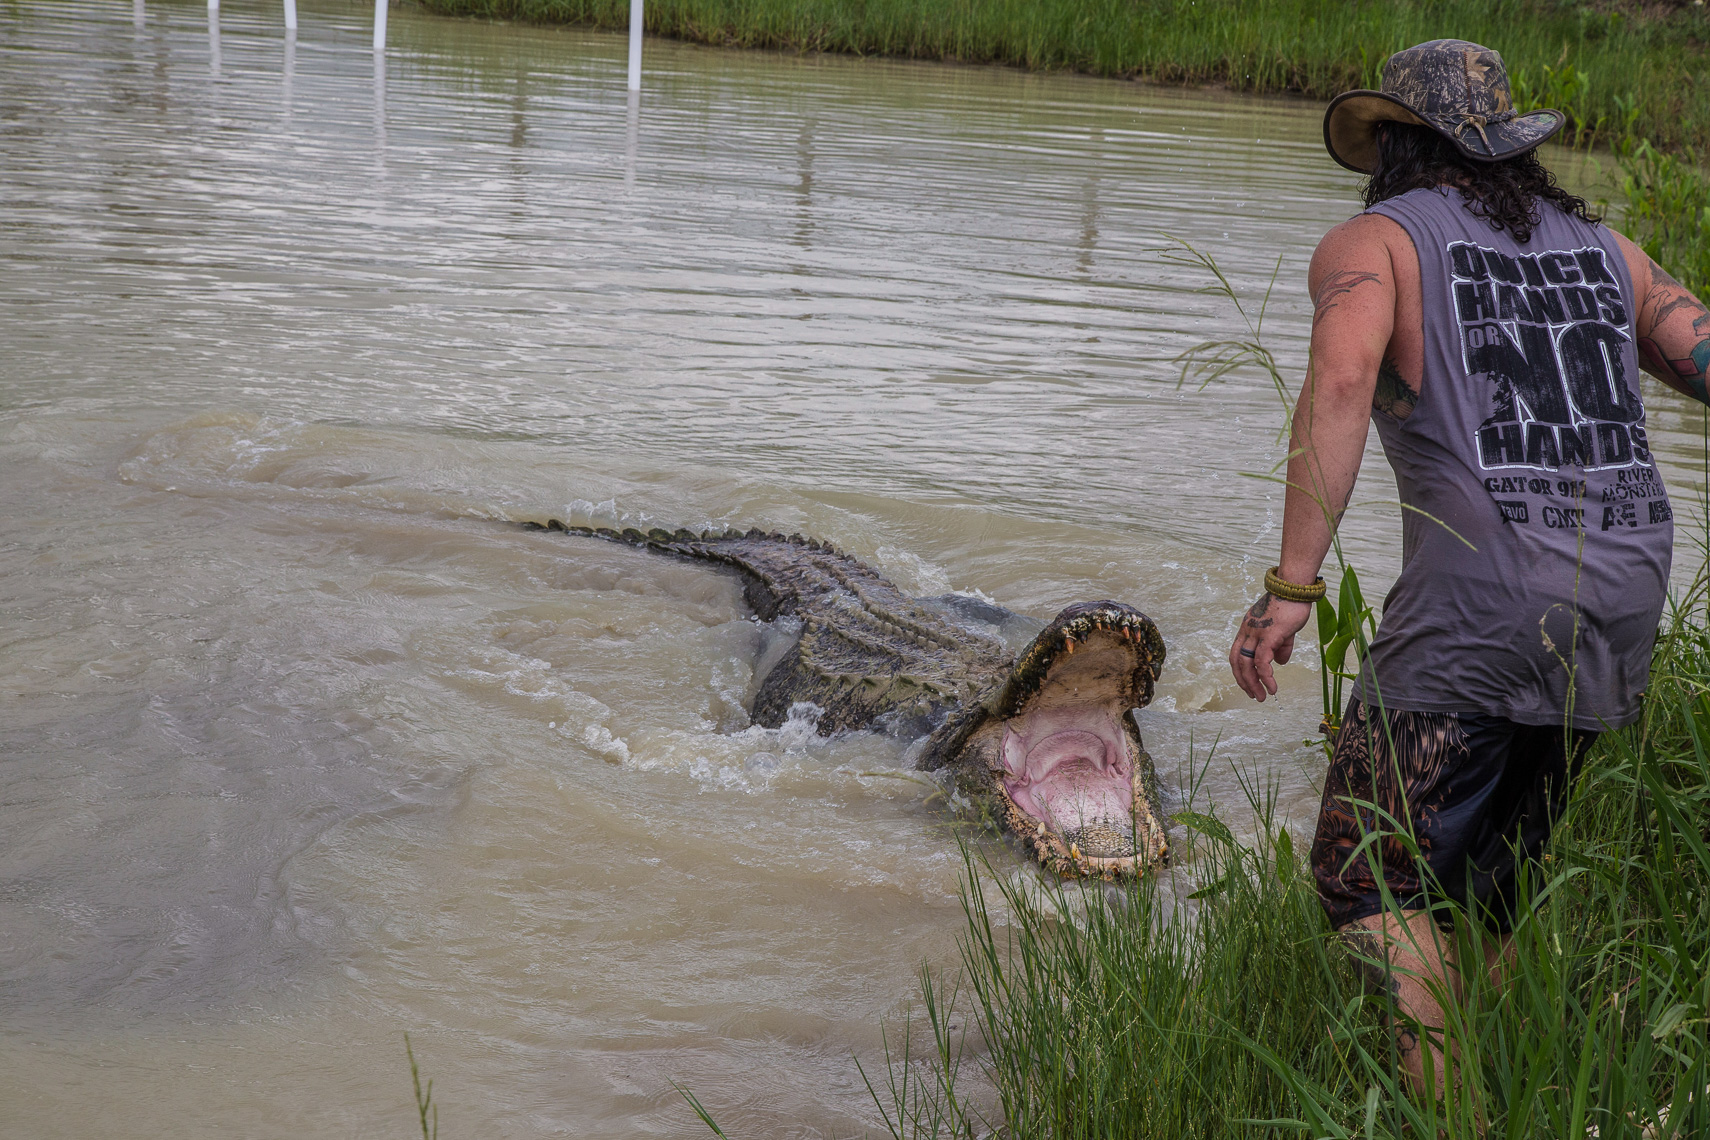 1035Man teases Big Al the alligator at Gator Country ,Beaumont, Texas